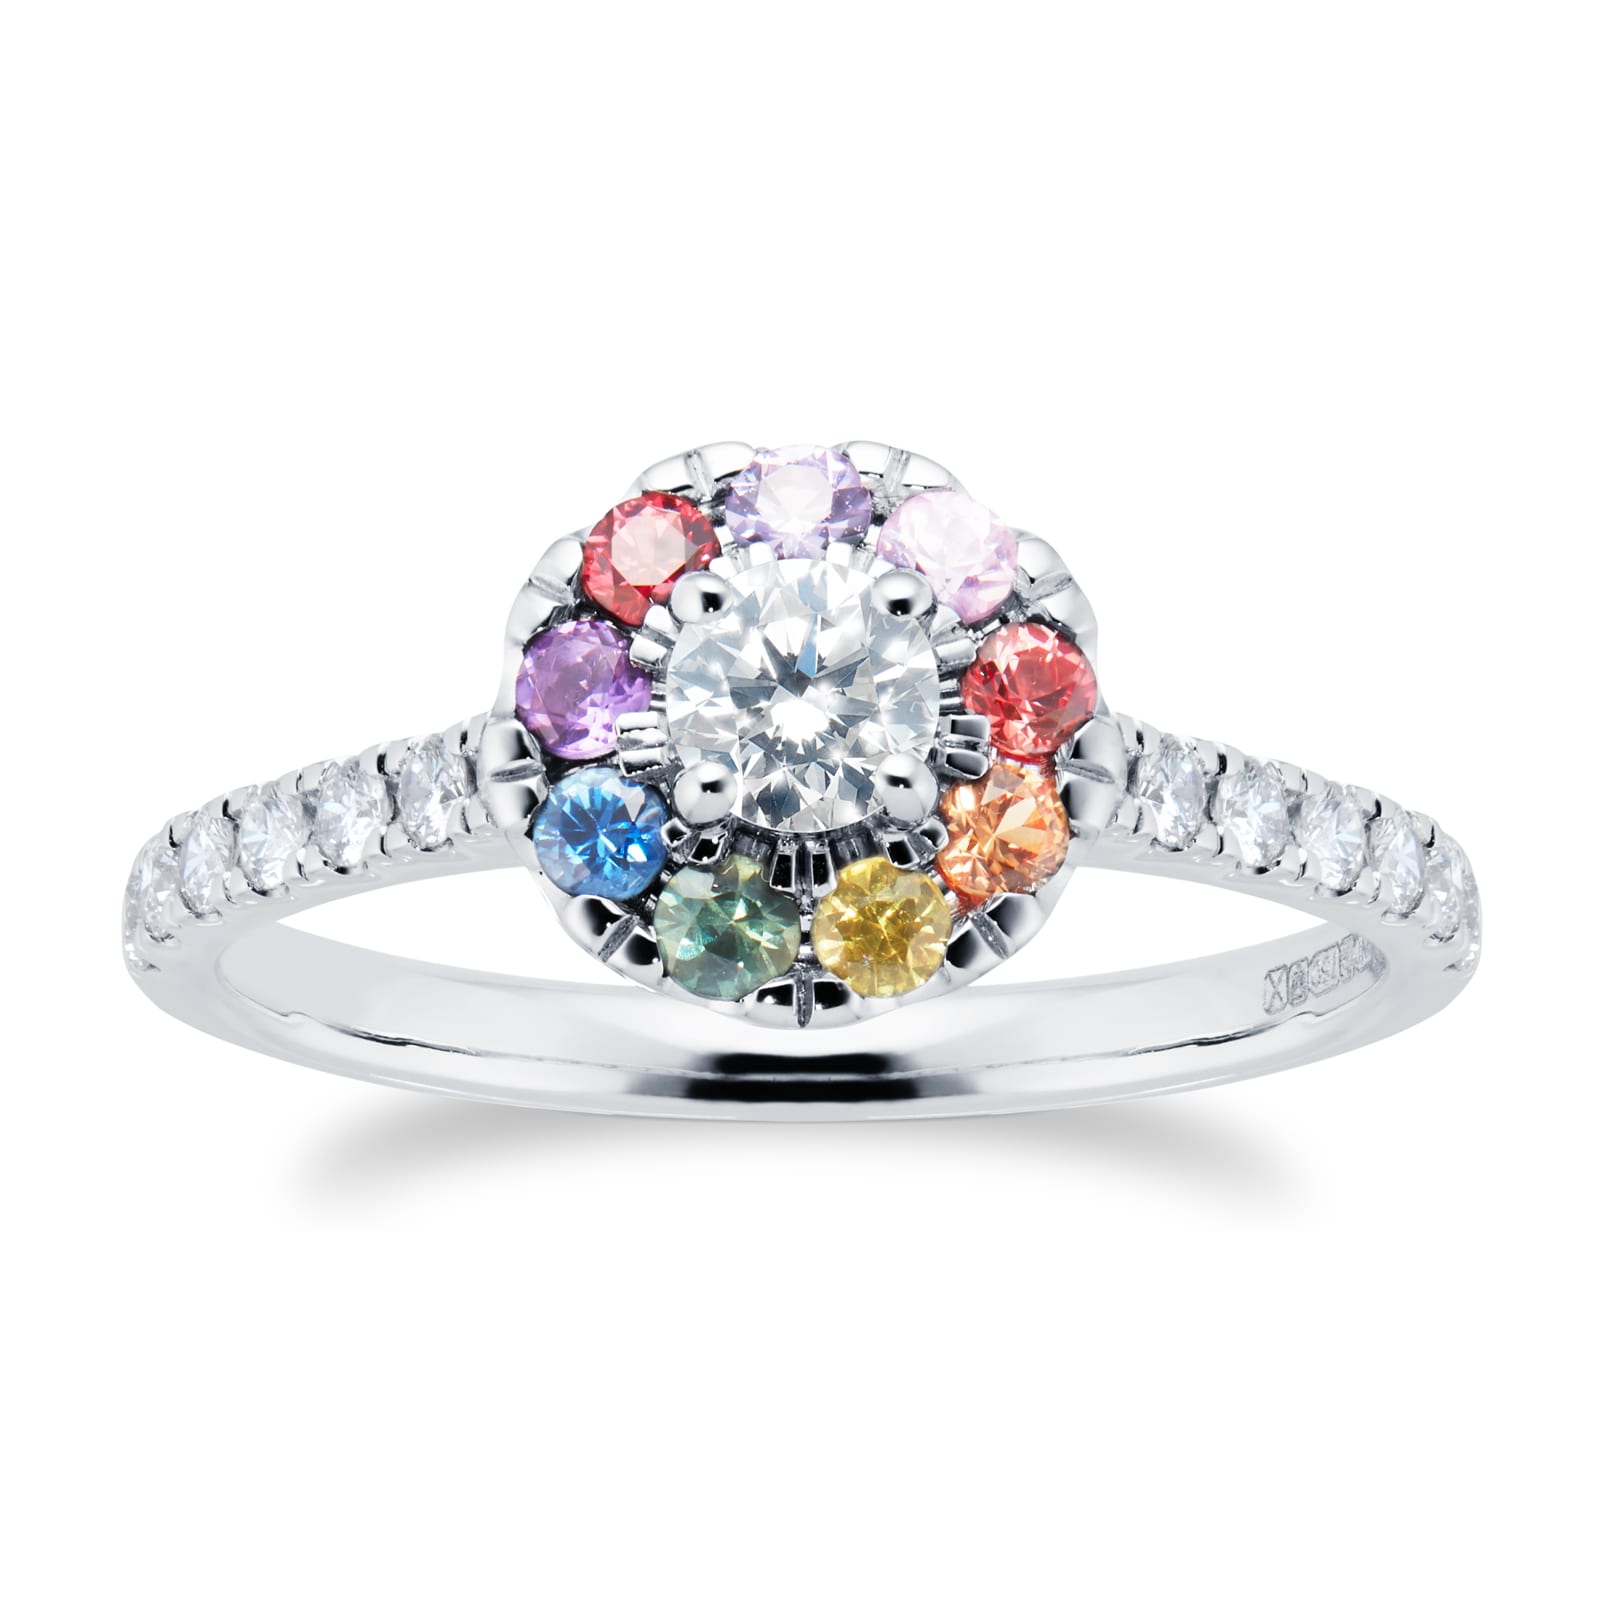 18ct White Gold Diamond & Rainbow Sapphire Halo Ring - Ring Size A.5